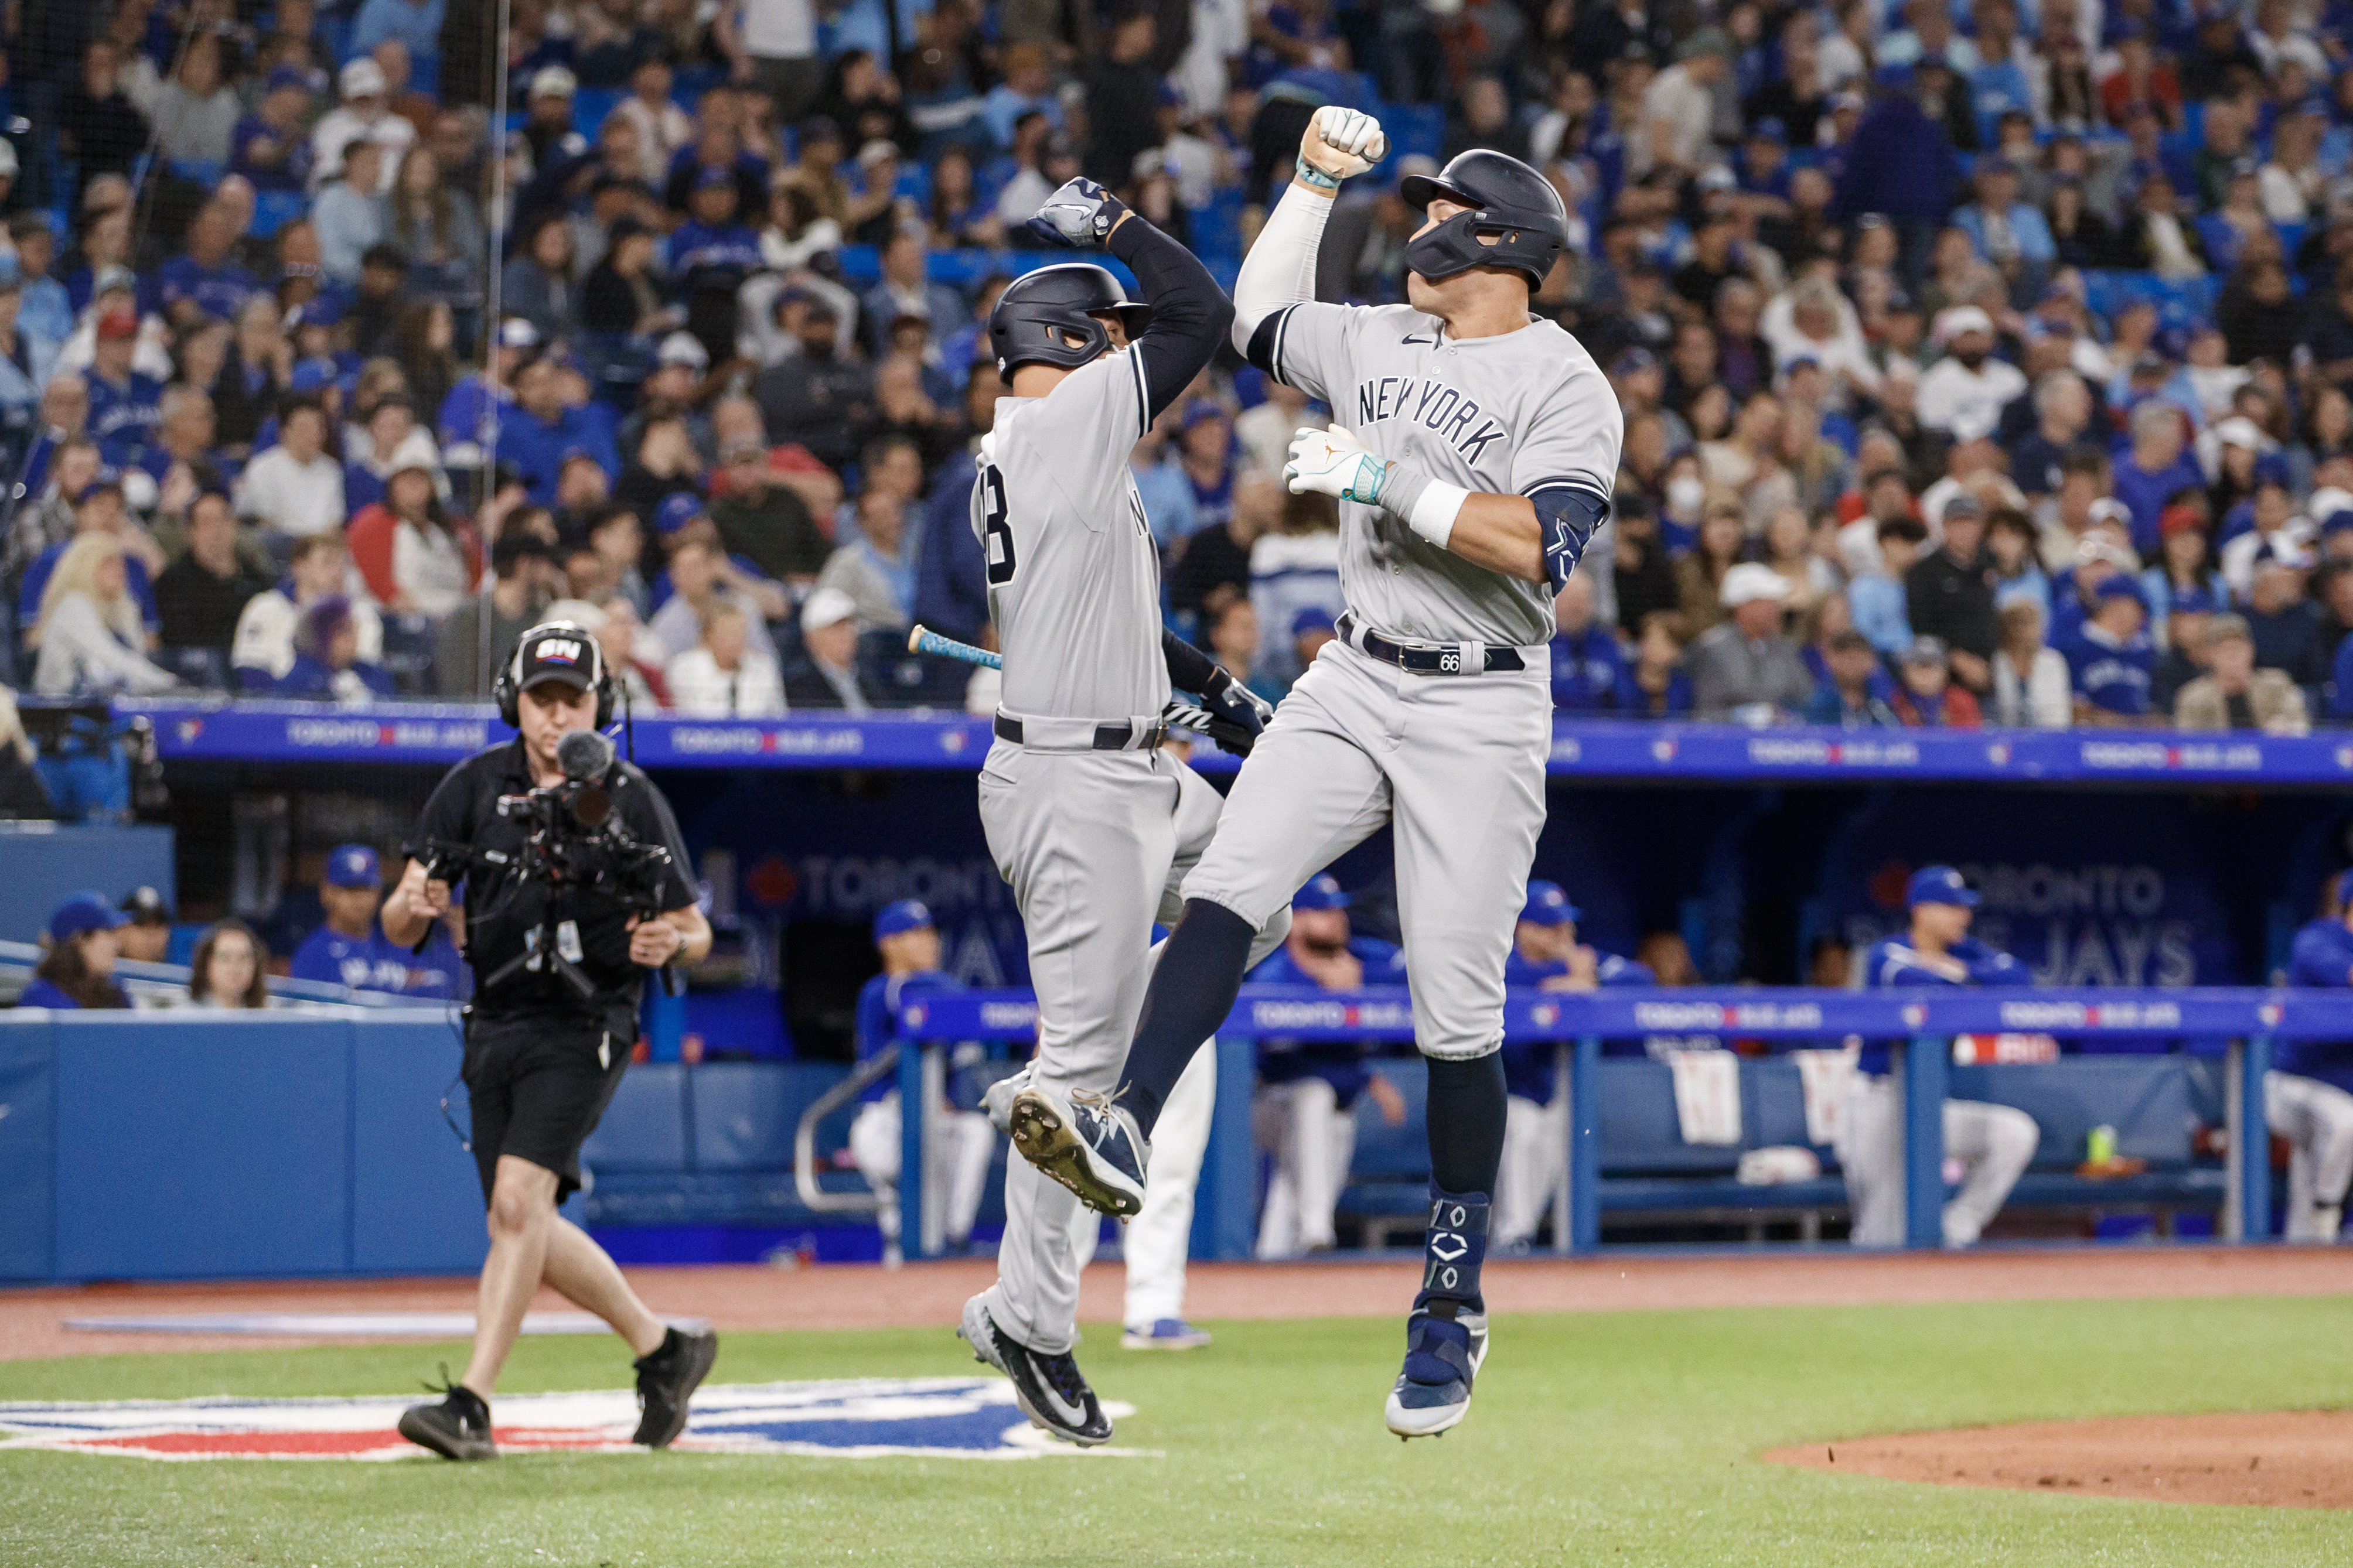 Gleyber Torres Powers Yankees Past Blue Jays - The New York Times